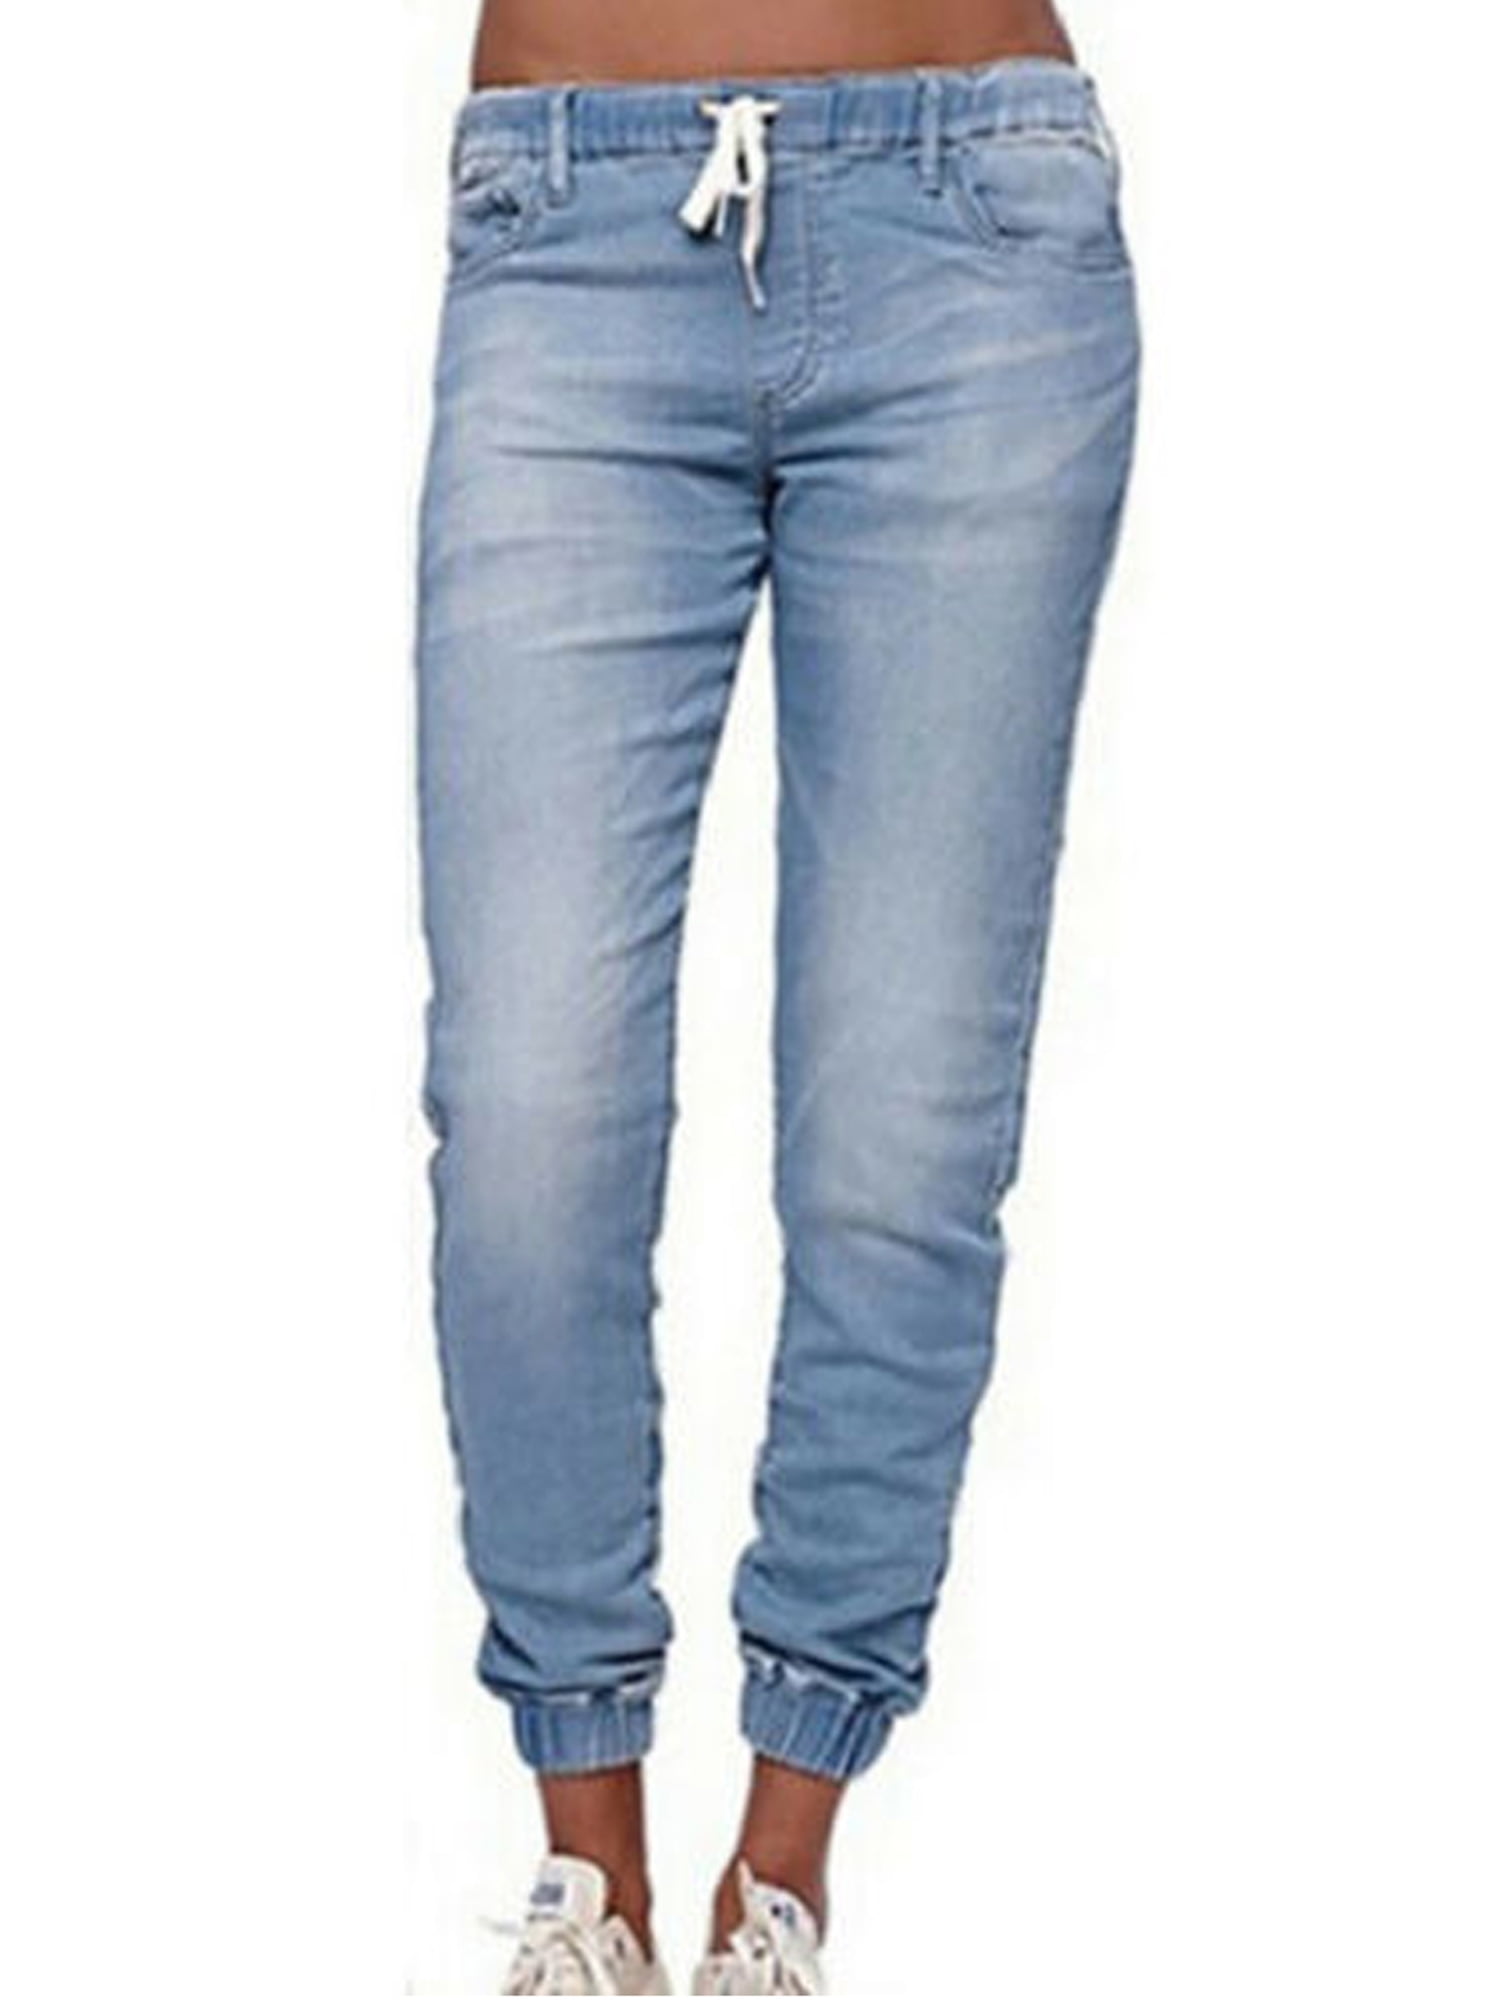 Lazybaby Womens Solid Color Elastic Waist Jeans Pencil Denim Stretch ...